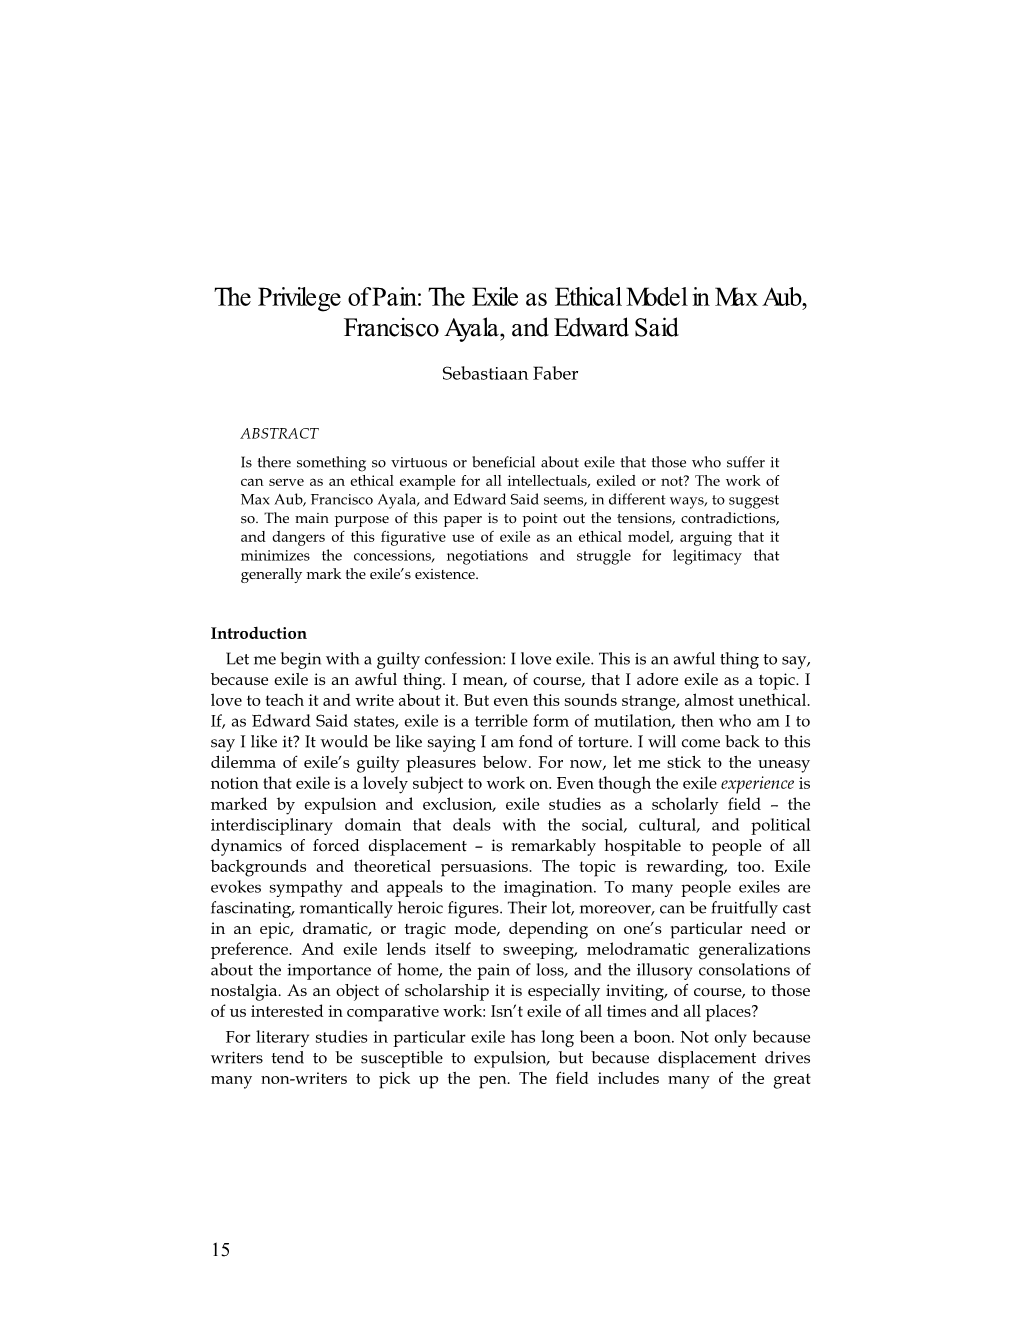 The Privilege of Pain: the Exile As Ethical Model in Max Aub, Francisco Ayala, and Edward Said